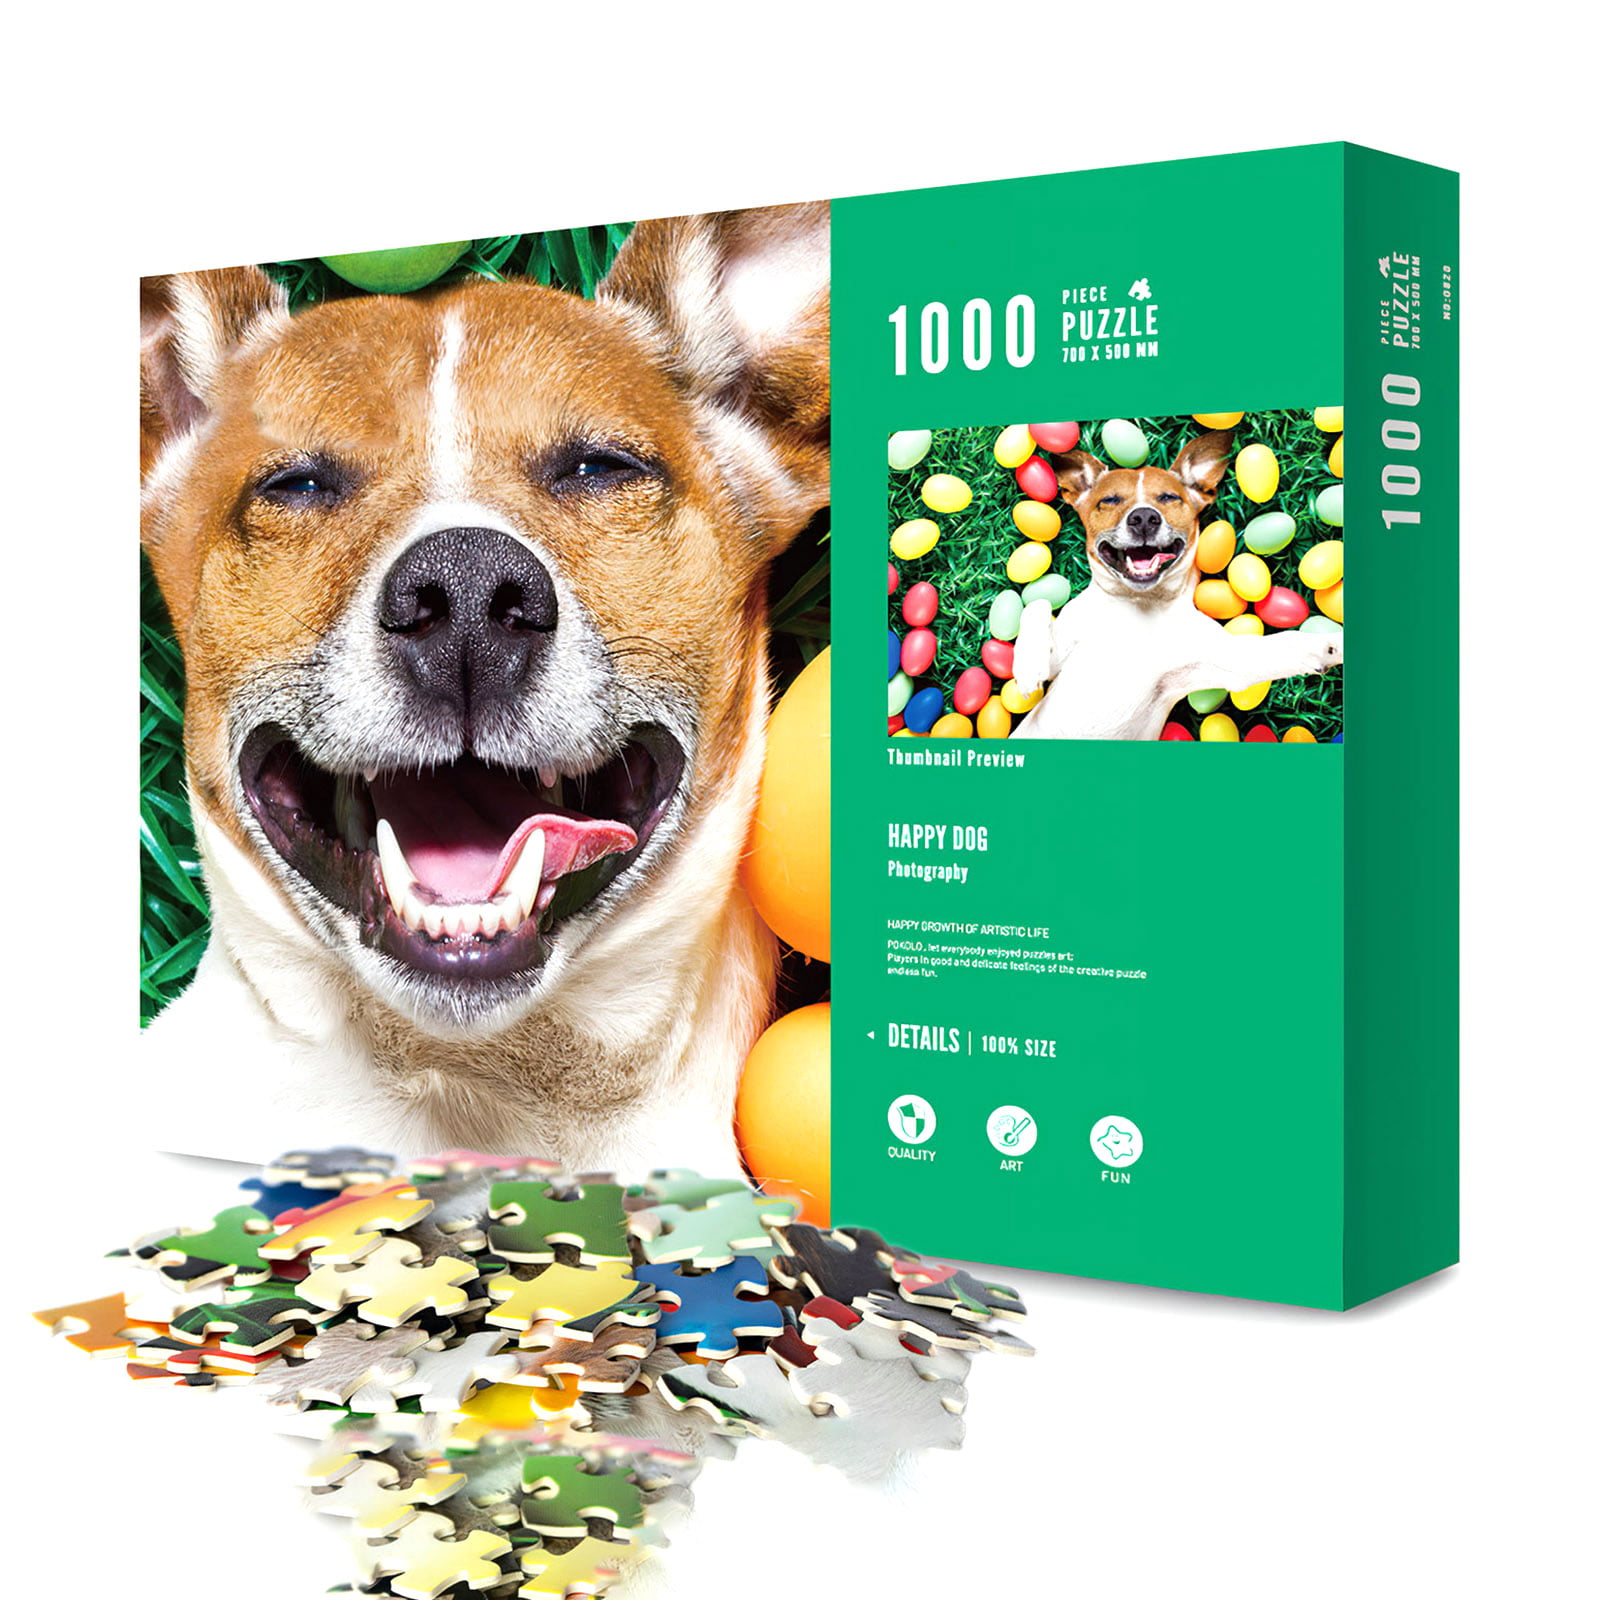 1000pcs Paper Jigsaw Puzzles Wear Clothes Dog Family Game Puzzle for Adult Kids 